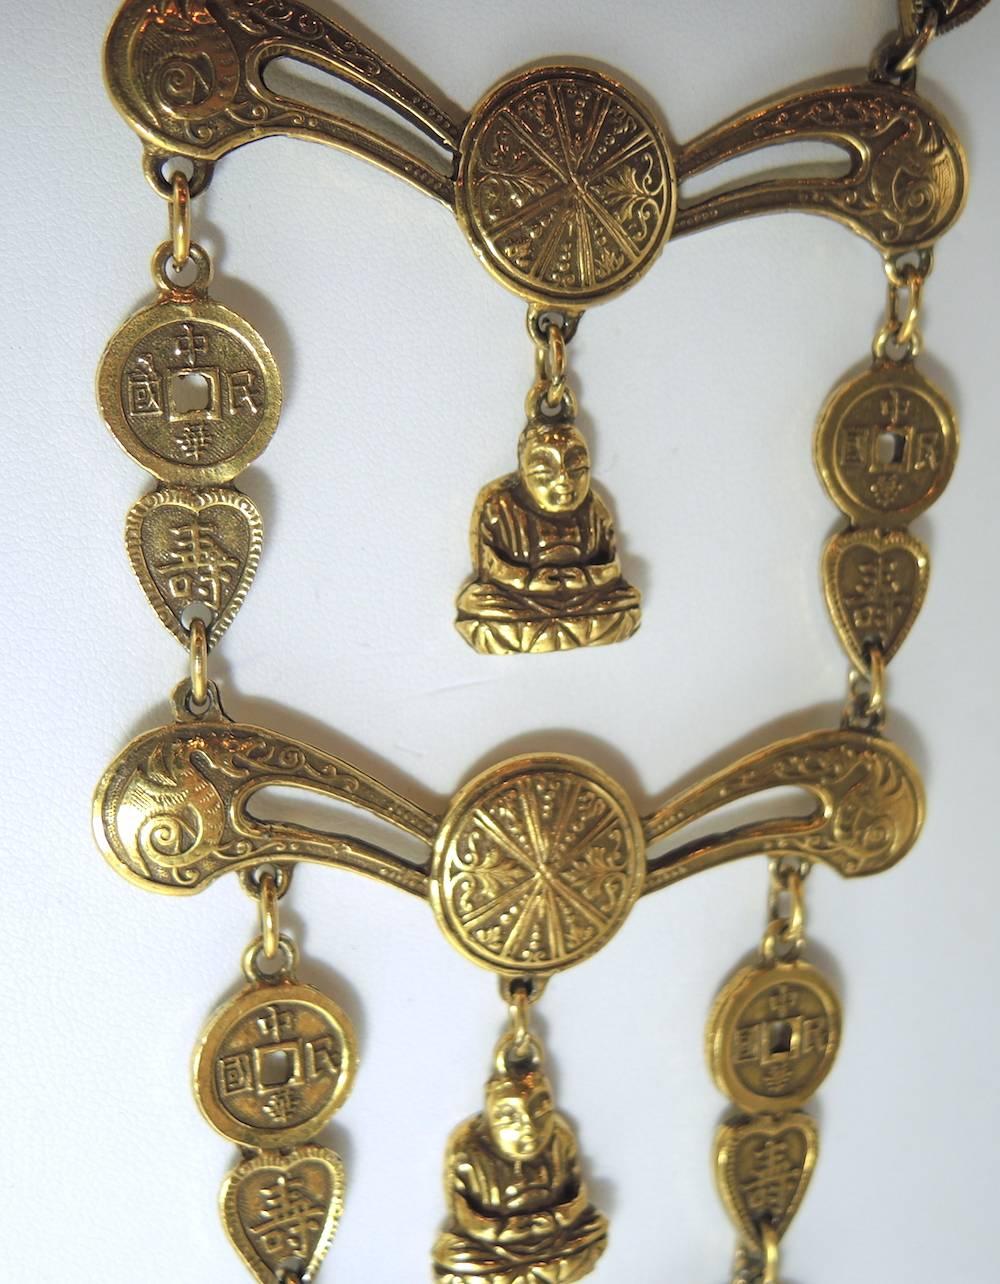 This 1950’s necklace was designed by Accessocraft and features a three-tiered necklace of round and heart shaped Asian symbols. All of the tiers have a Buddha in the center that dangles. This necklace is in a gold tone setting and measures 17” long.